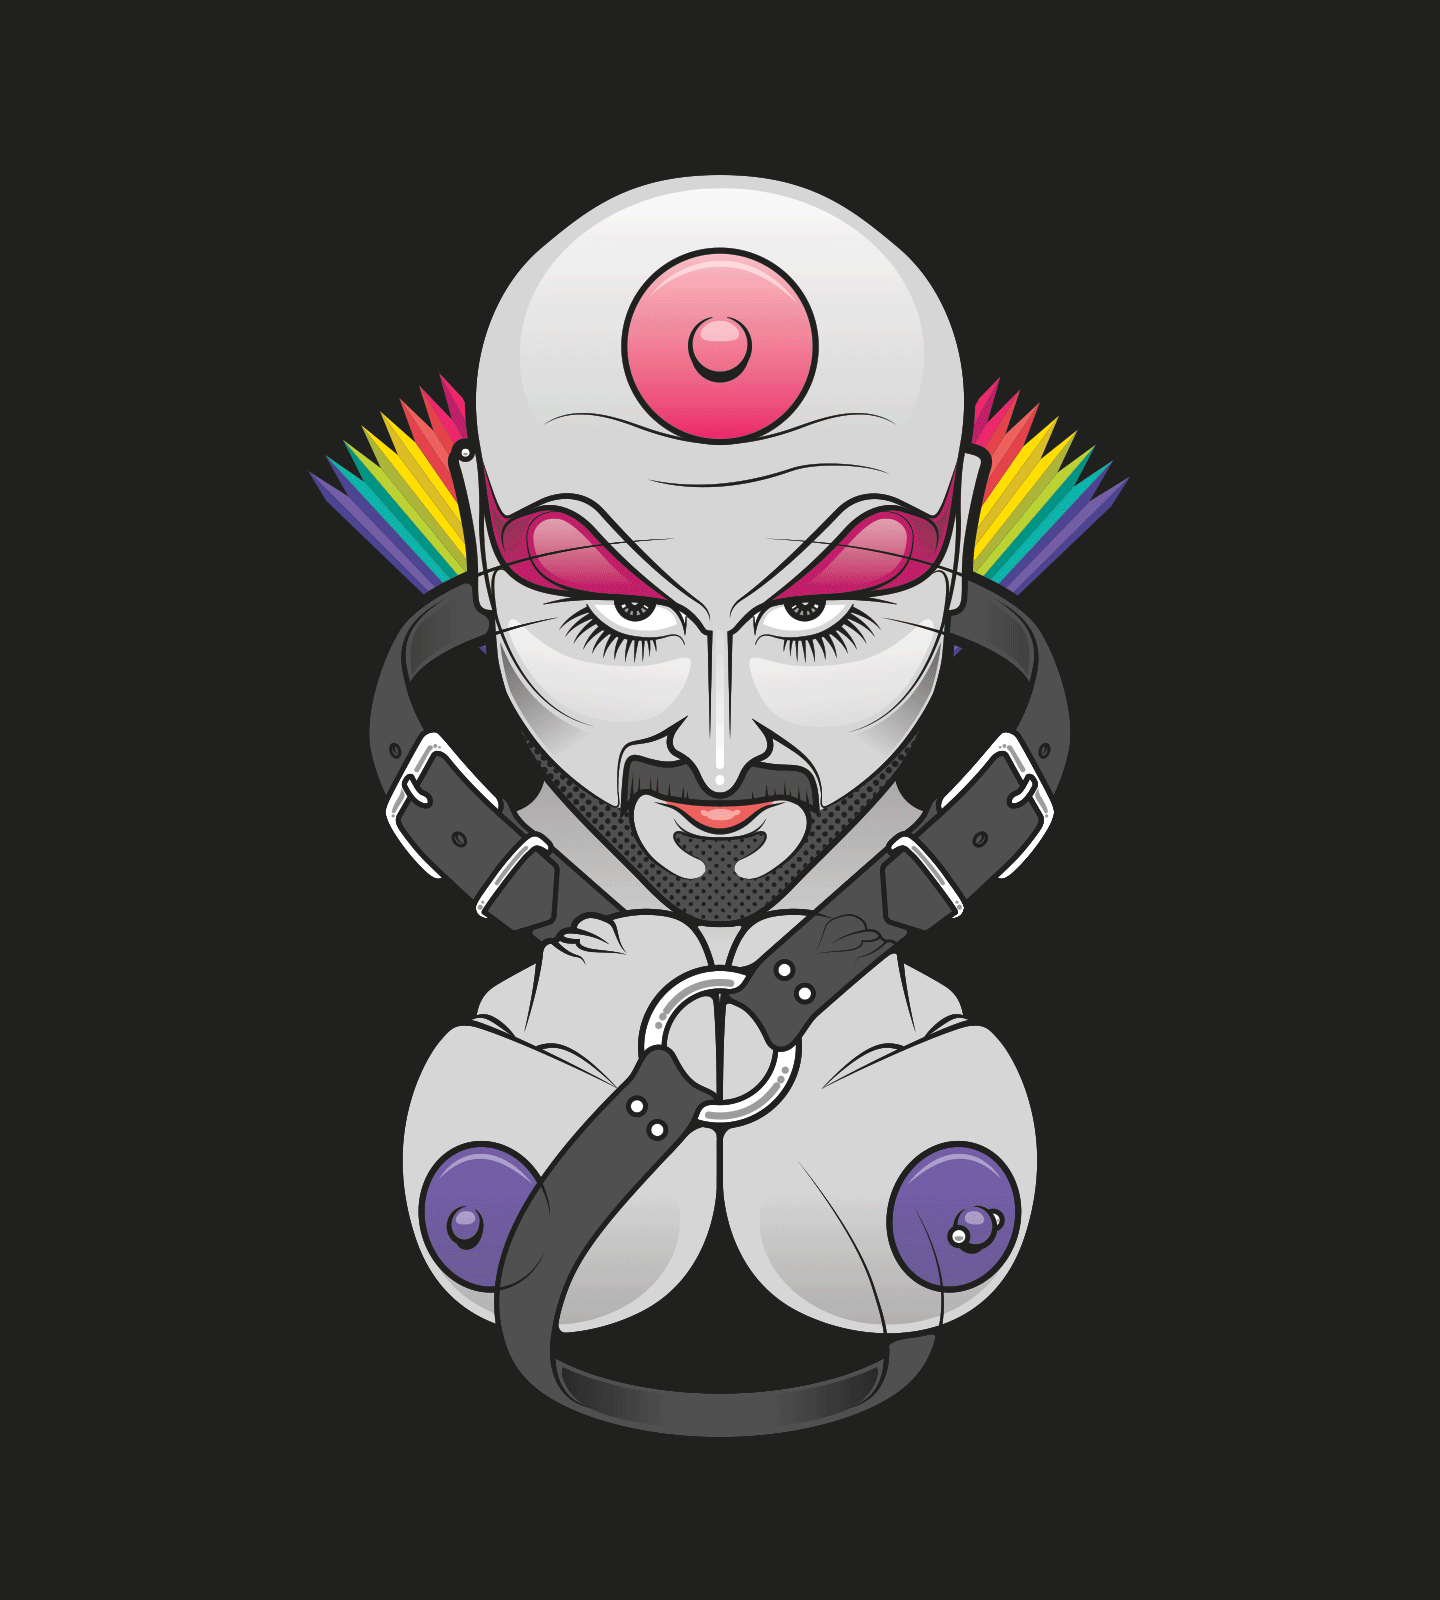 illustration_andre_levy_zhion_vector_pop_drag_queen_queer_fierce_portrait_gay_rainbow_lgbtqi_animation.gif